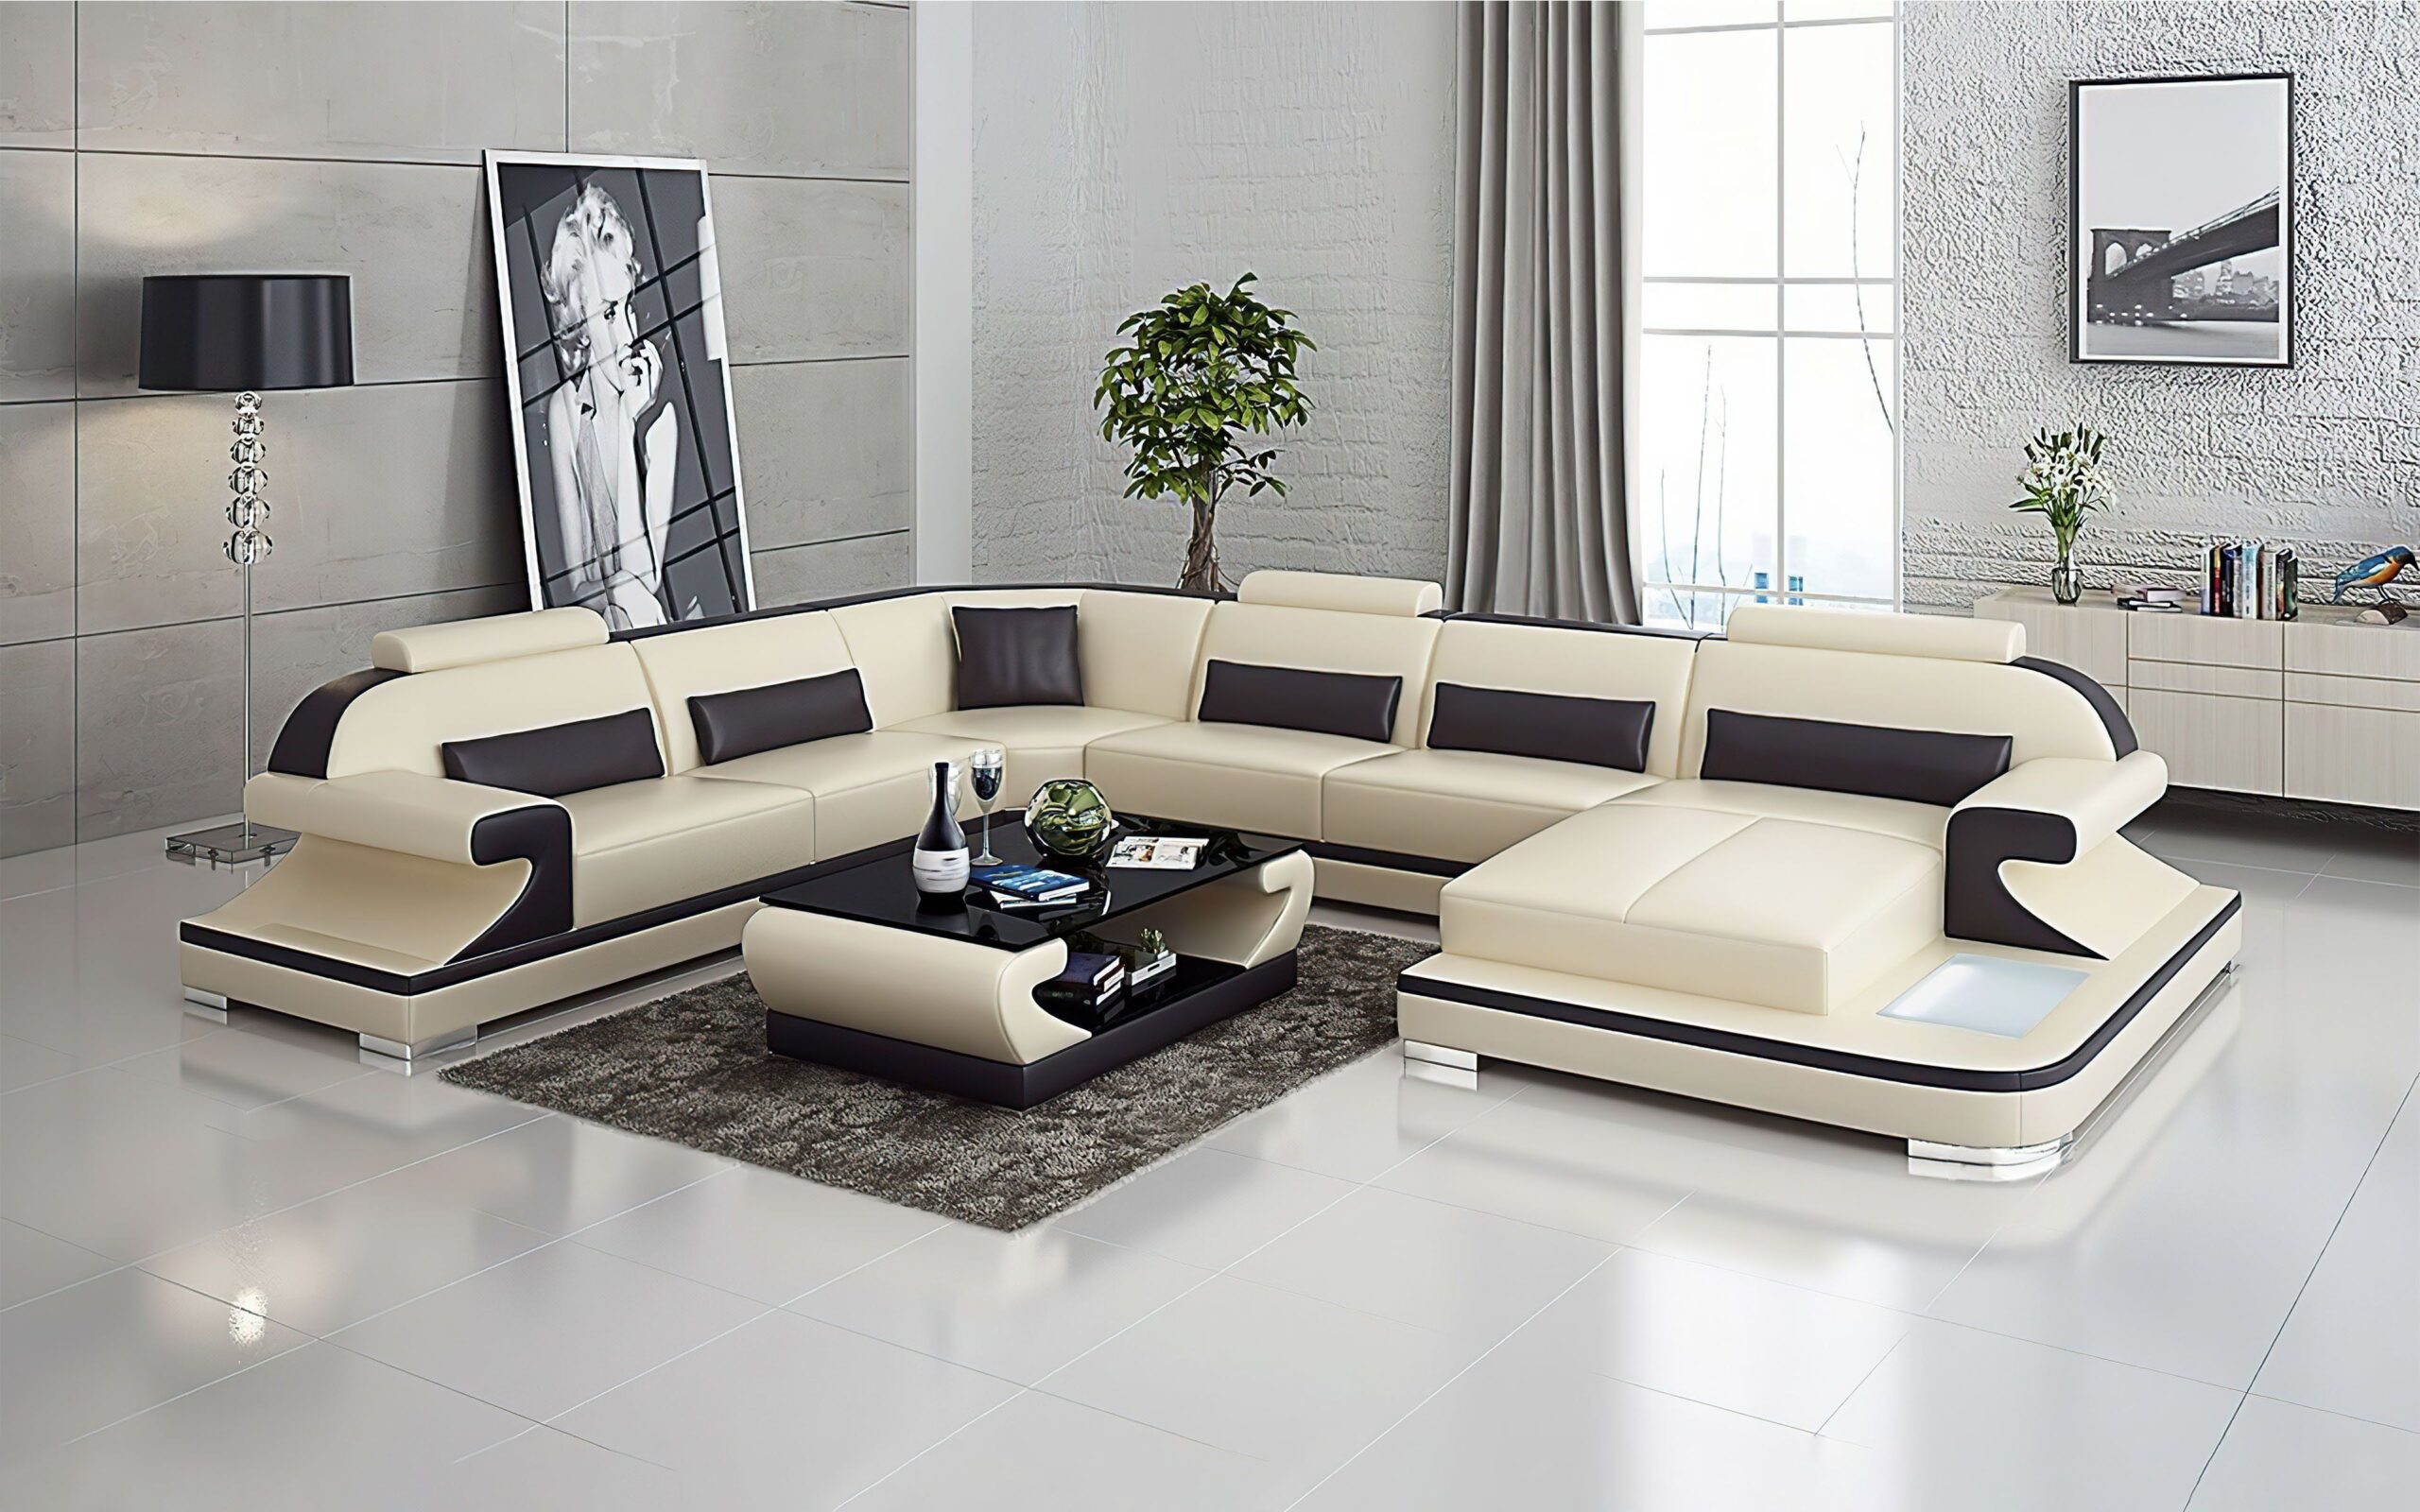 Stylish and Functional: Choosing the Best
Sectional Sofa in Las Vegas